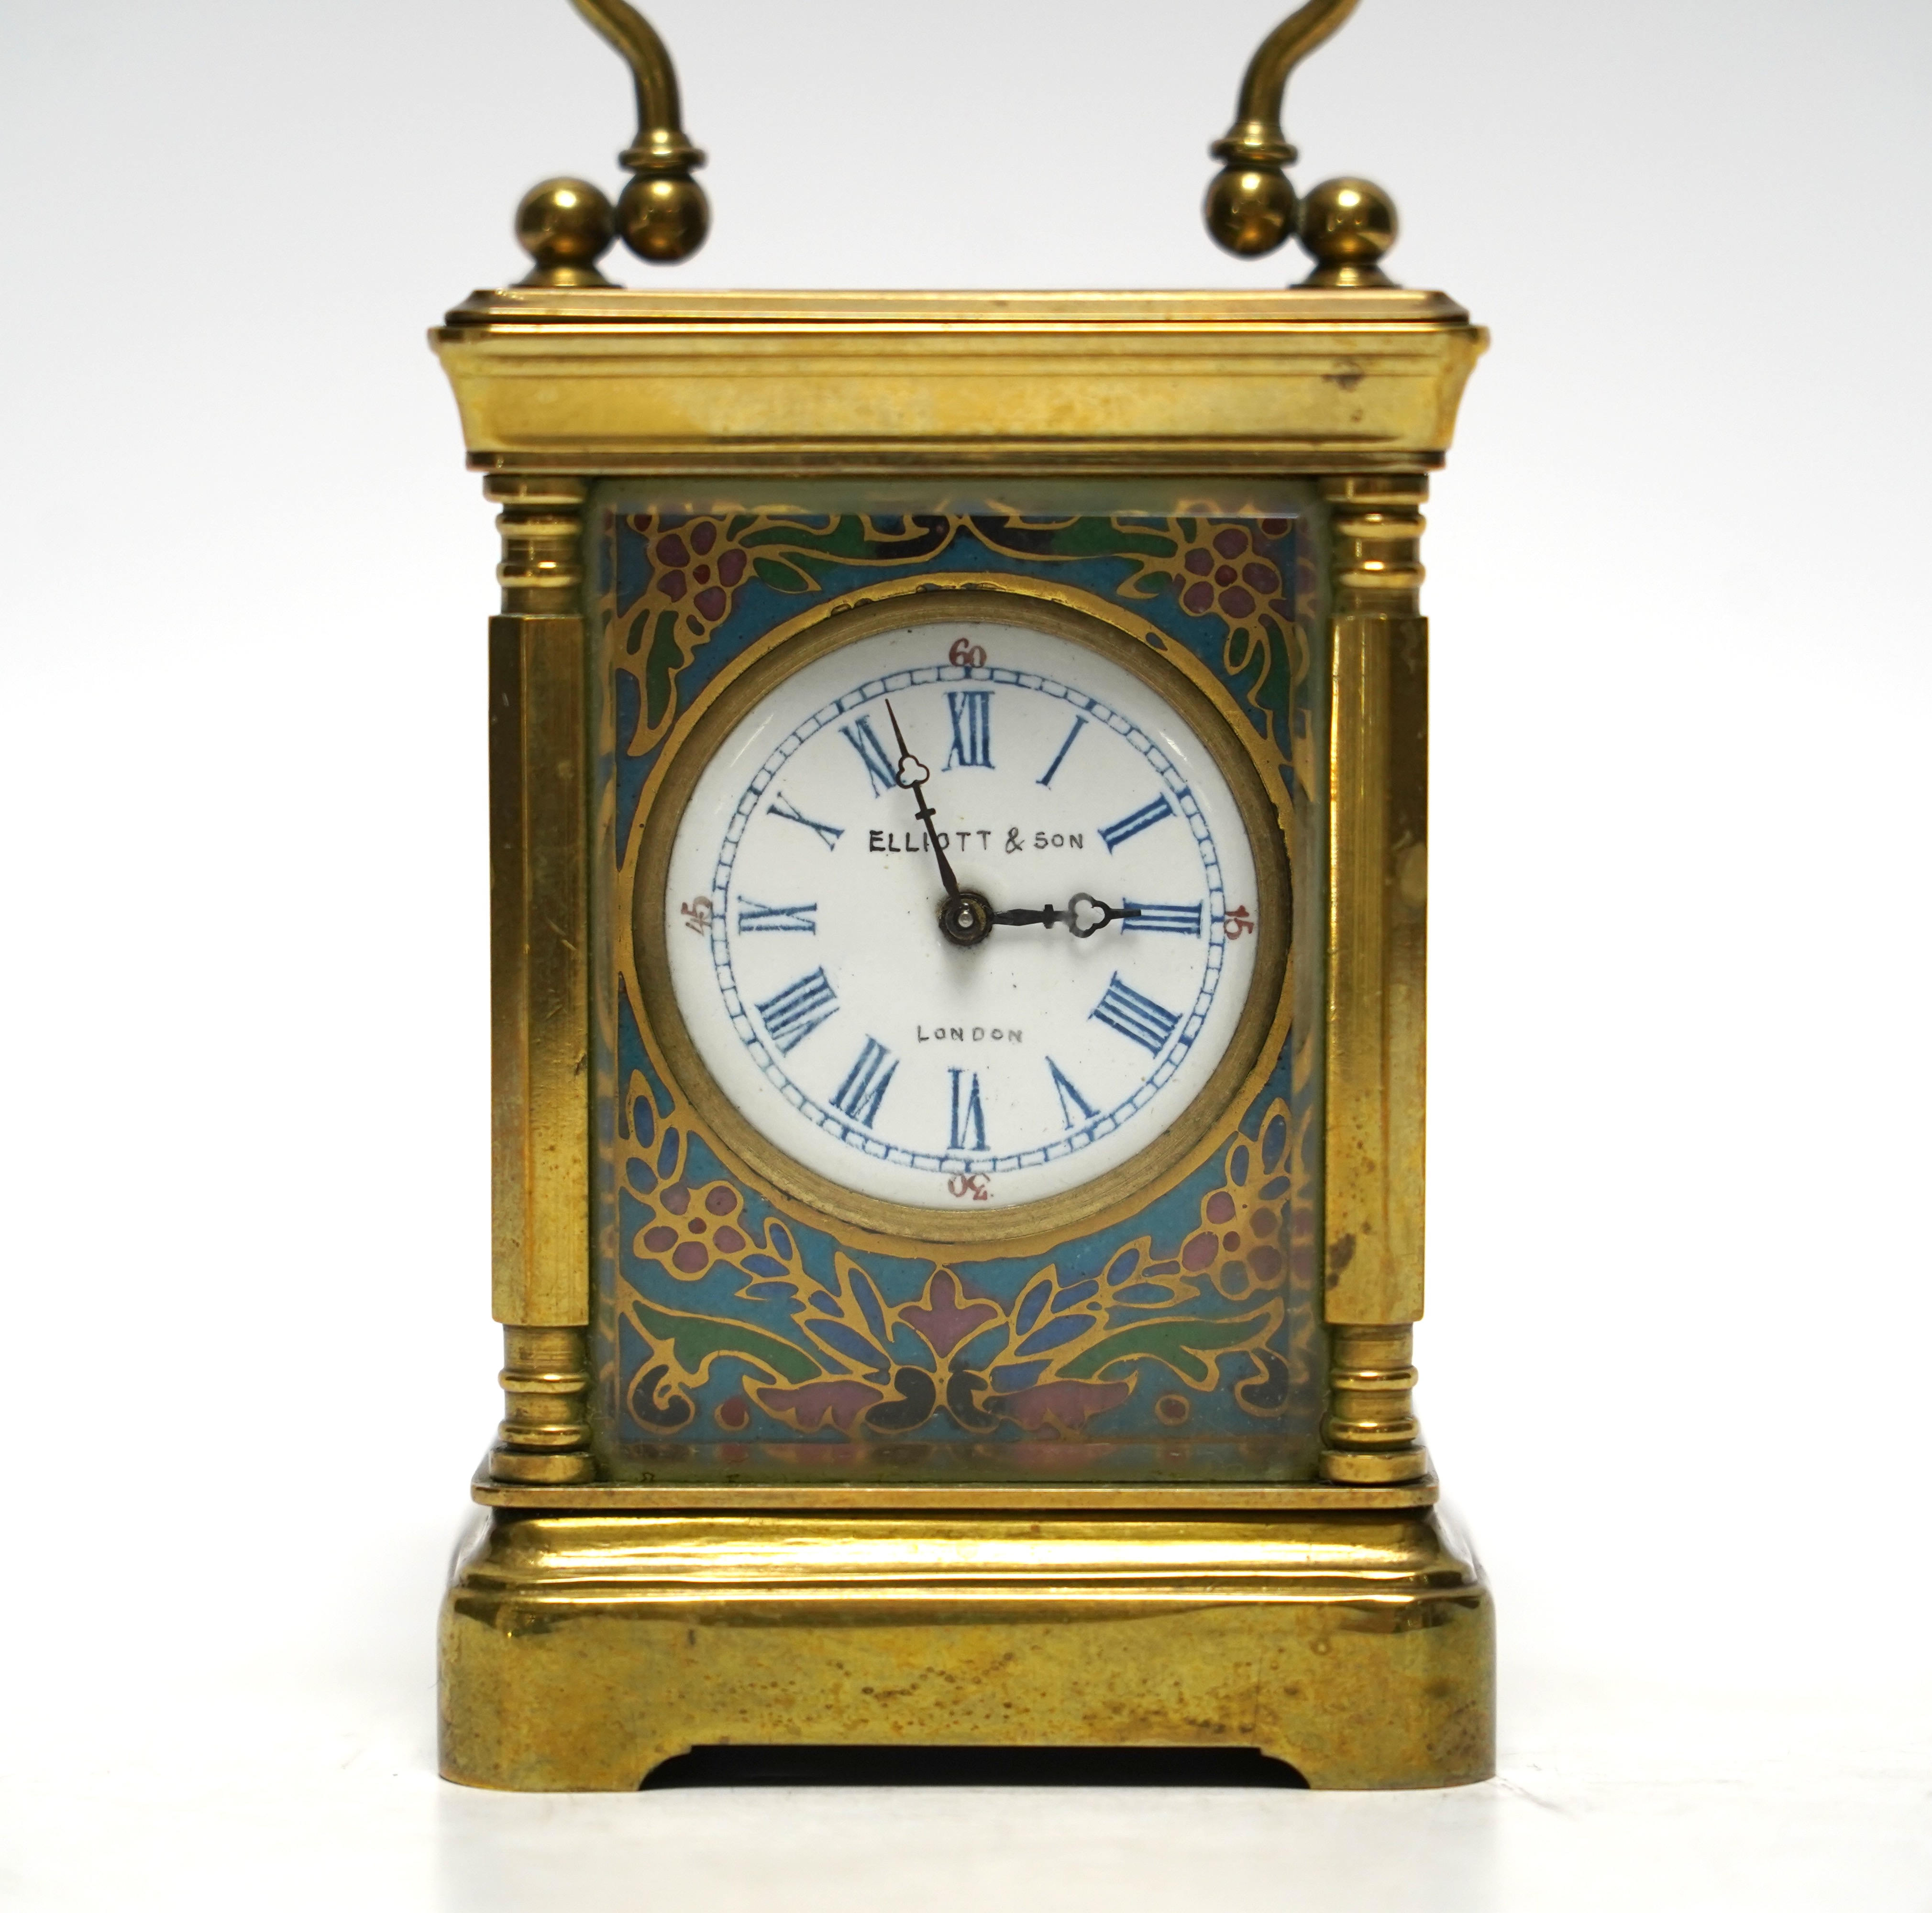 A miniature French brass carriage clock, with champlevé enamel panels, face signed Elliott & Son, London, 8.5cm